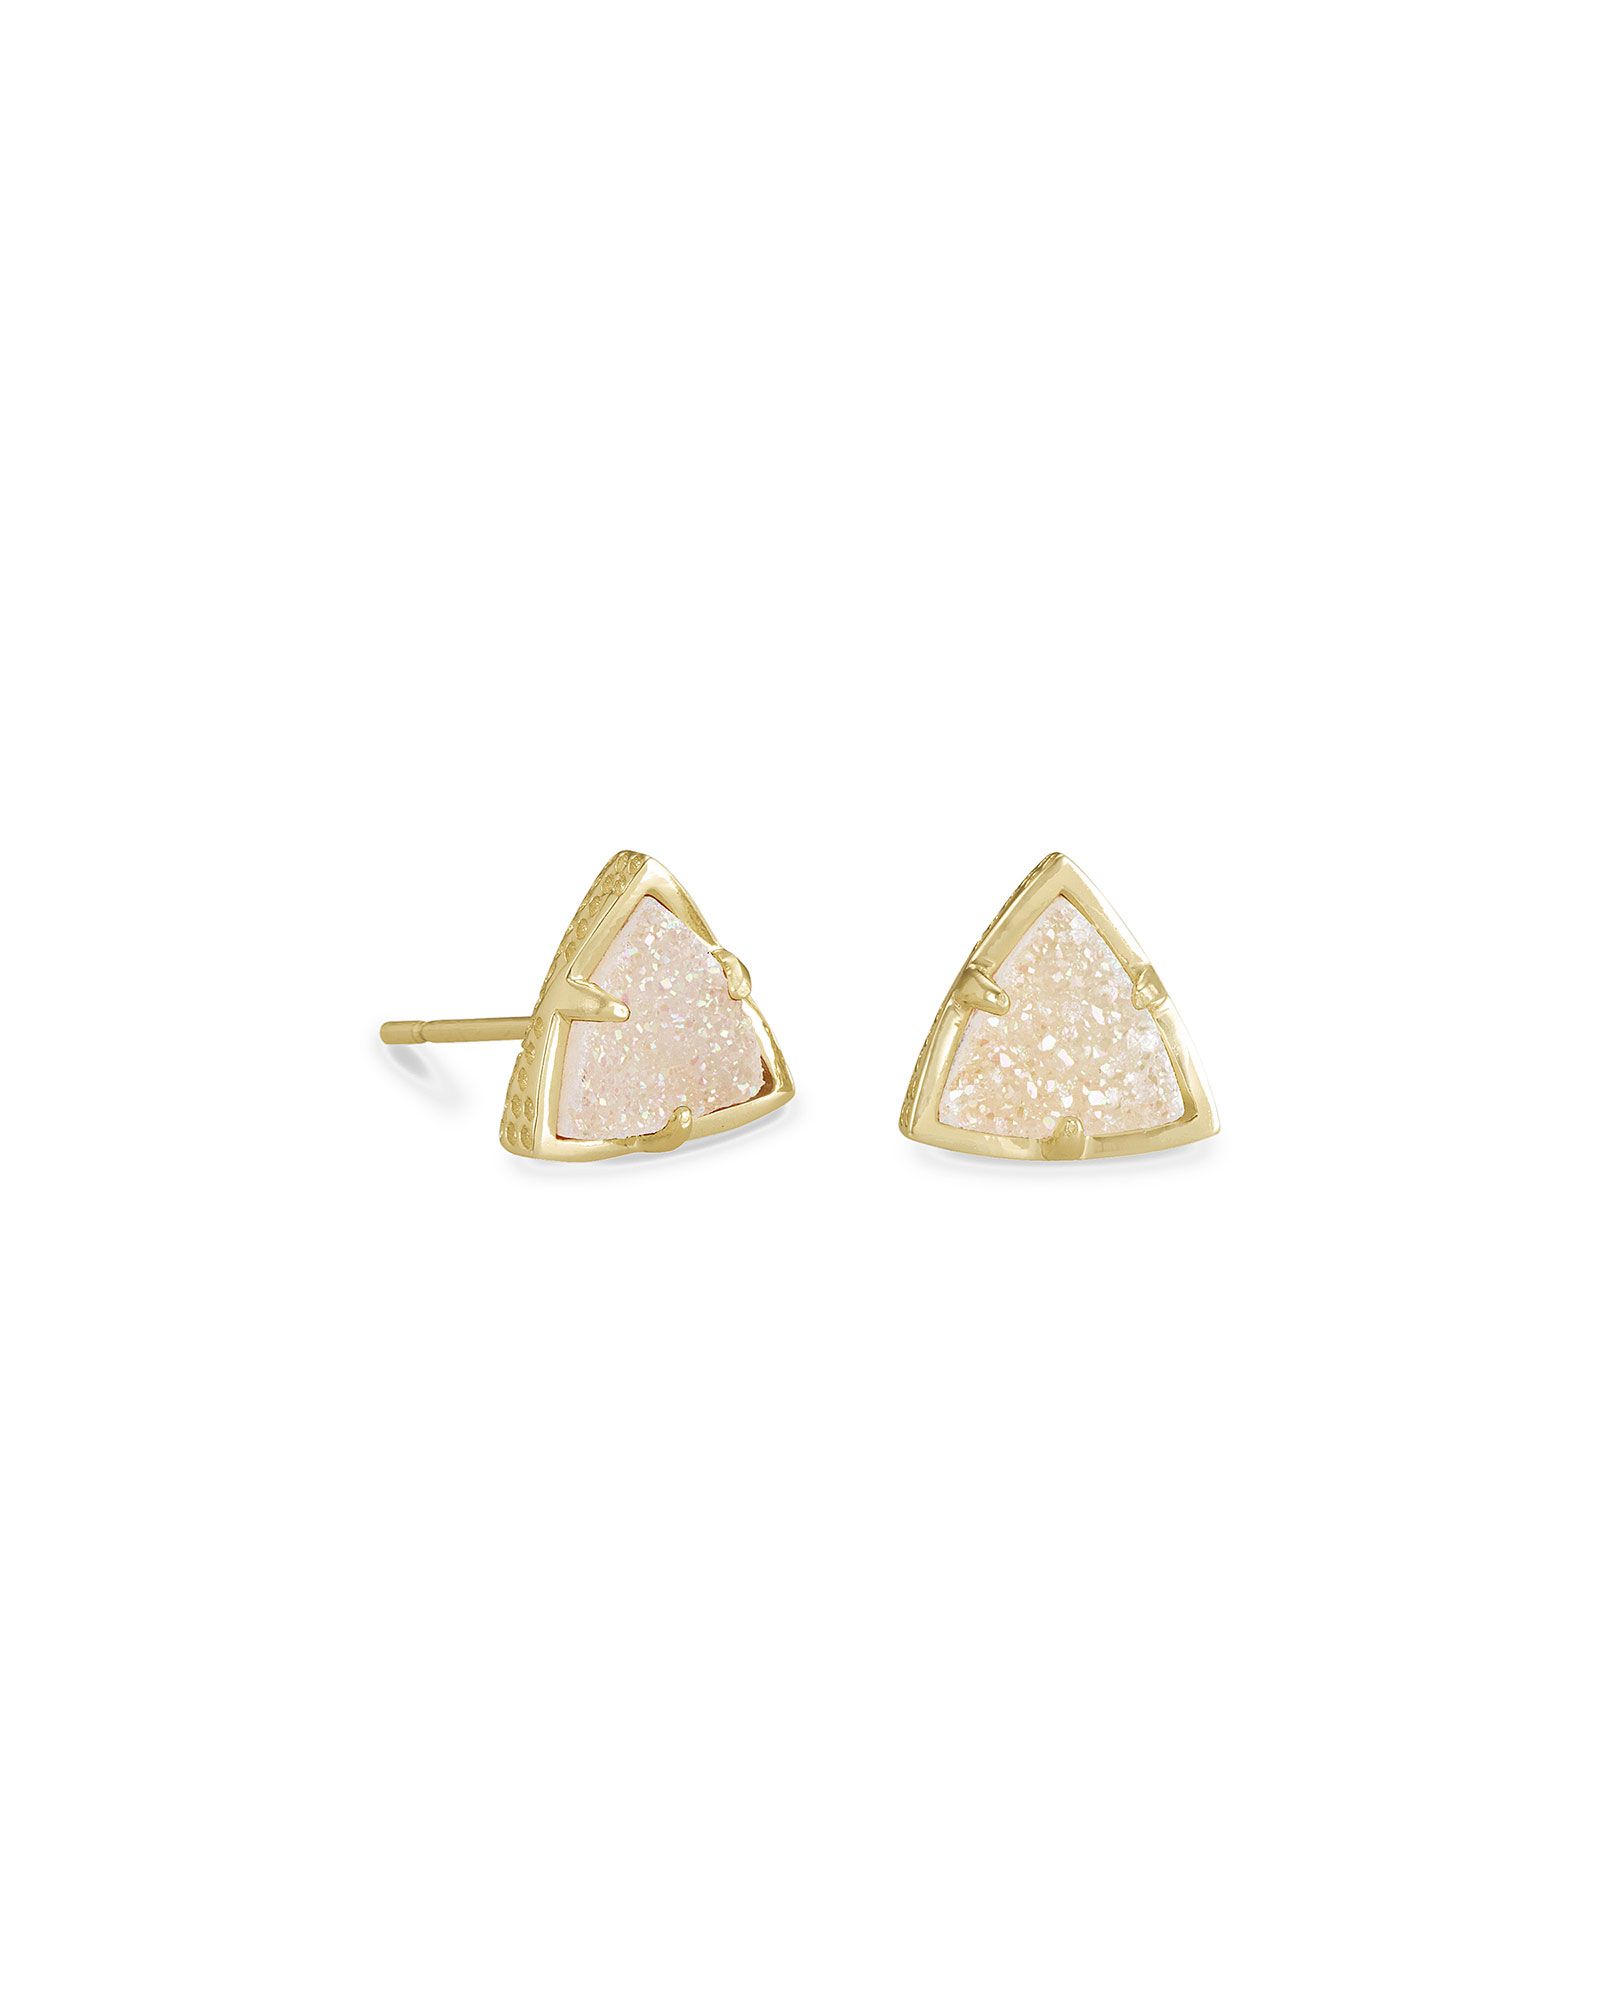 Perry Gold Stud Earrings in Iridescent Drusy | Kendra Scott